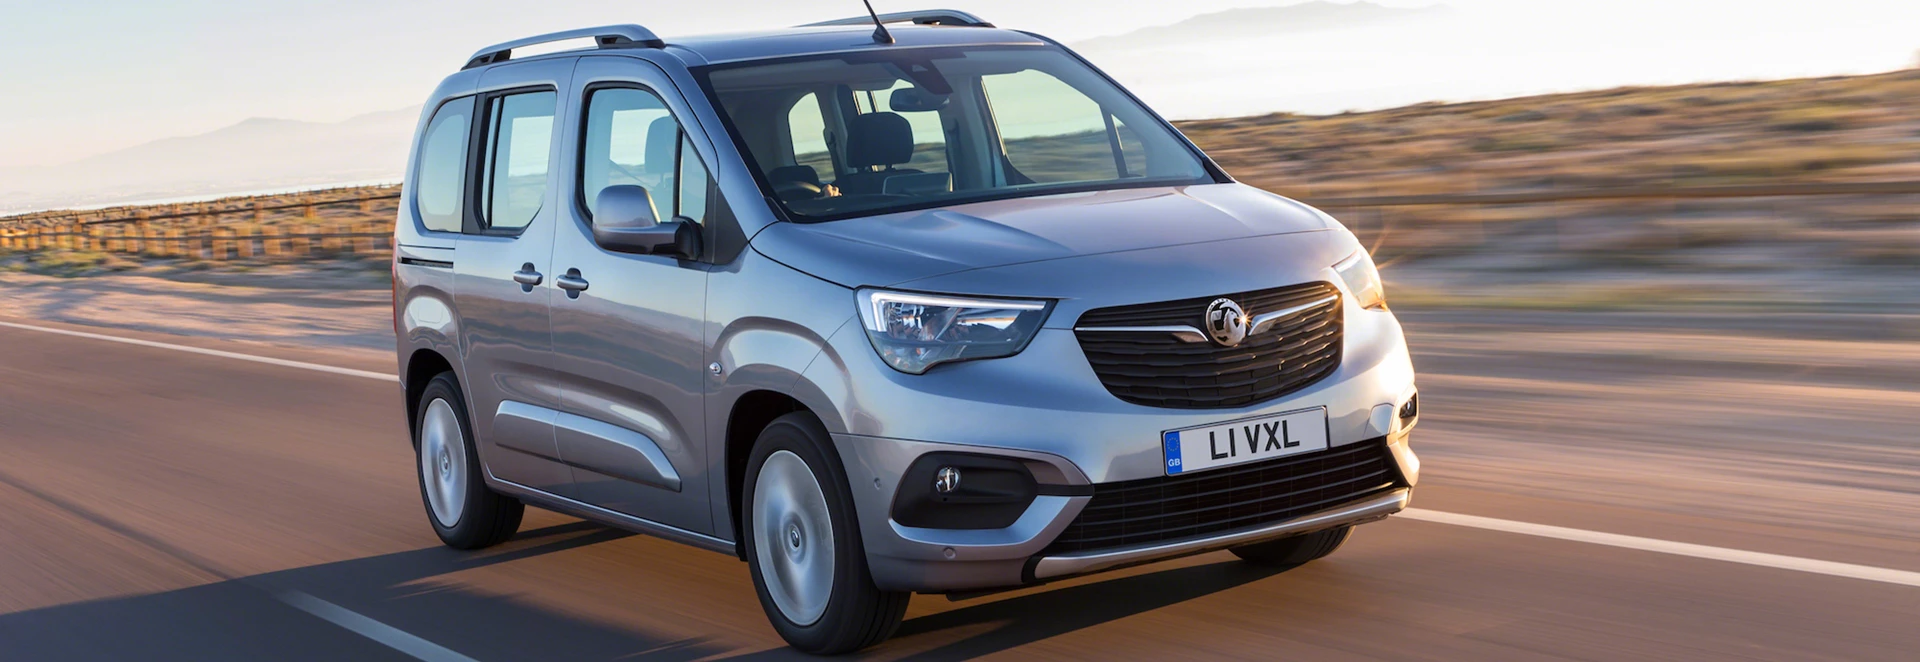 2018 Vauxhall Combo Life MPV - prices and spec revealed 